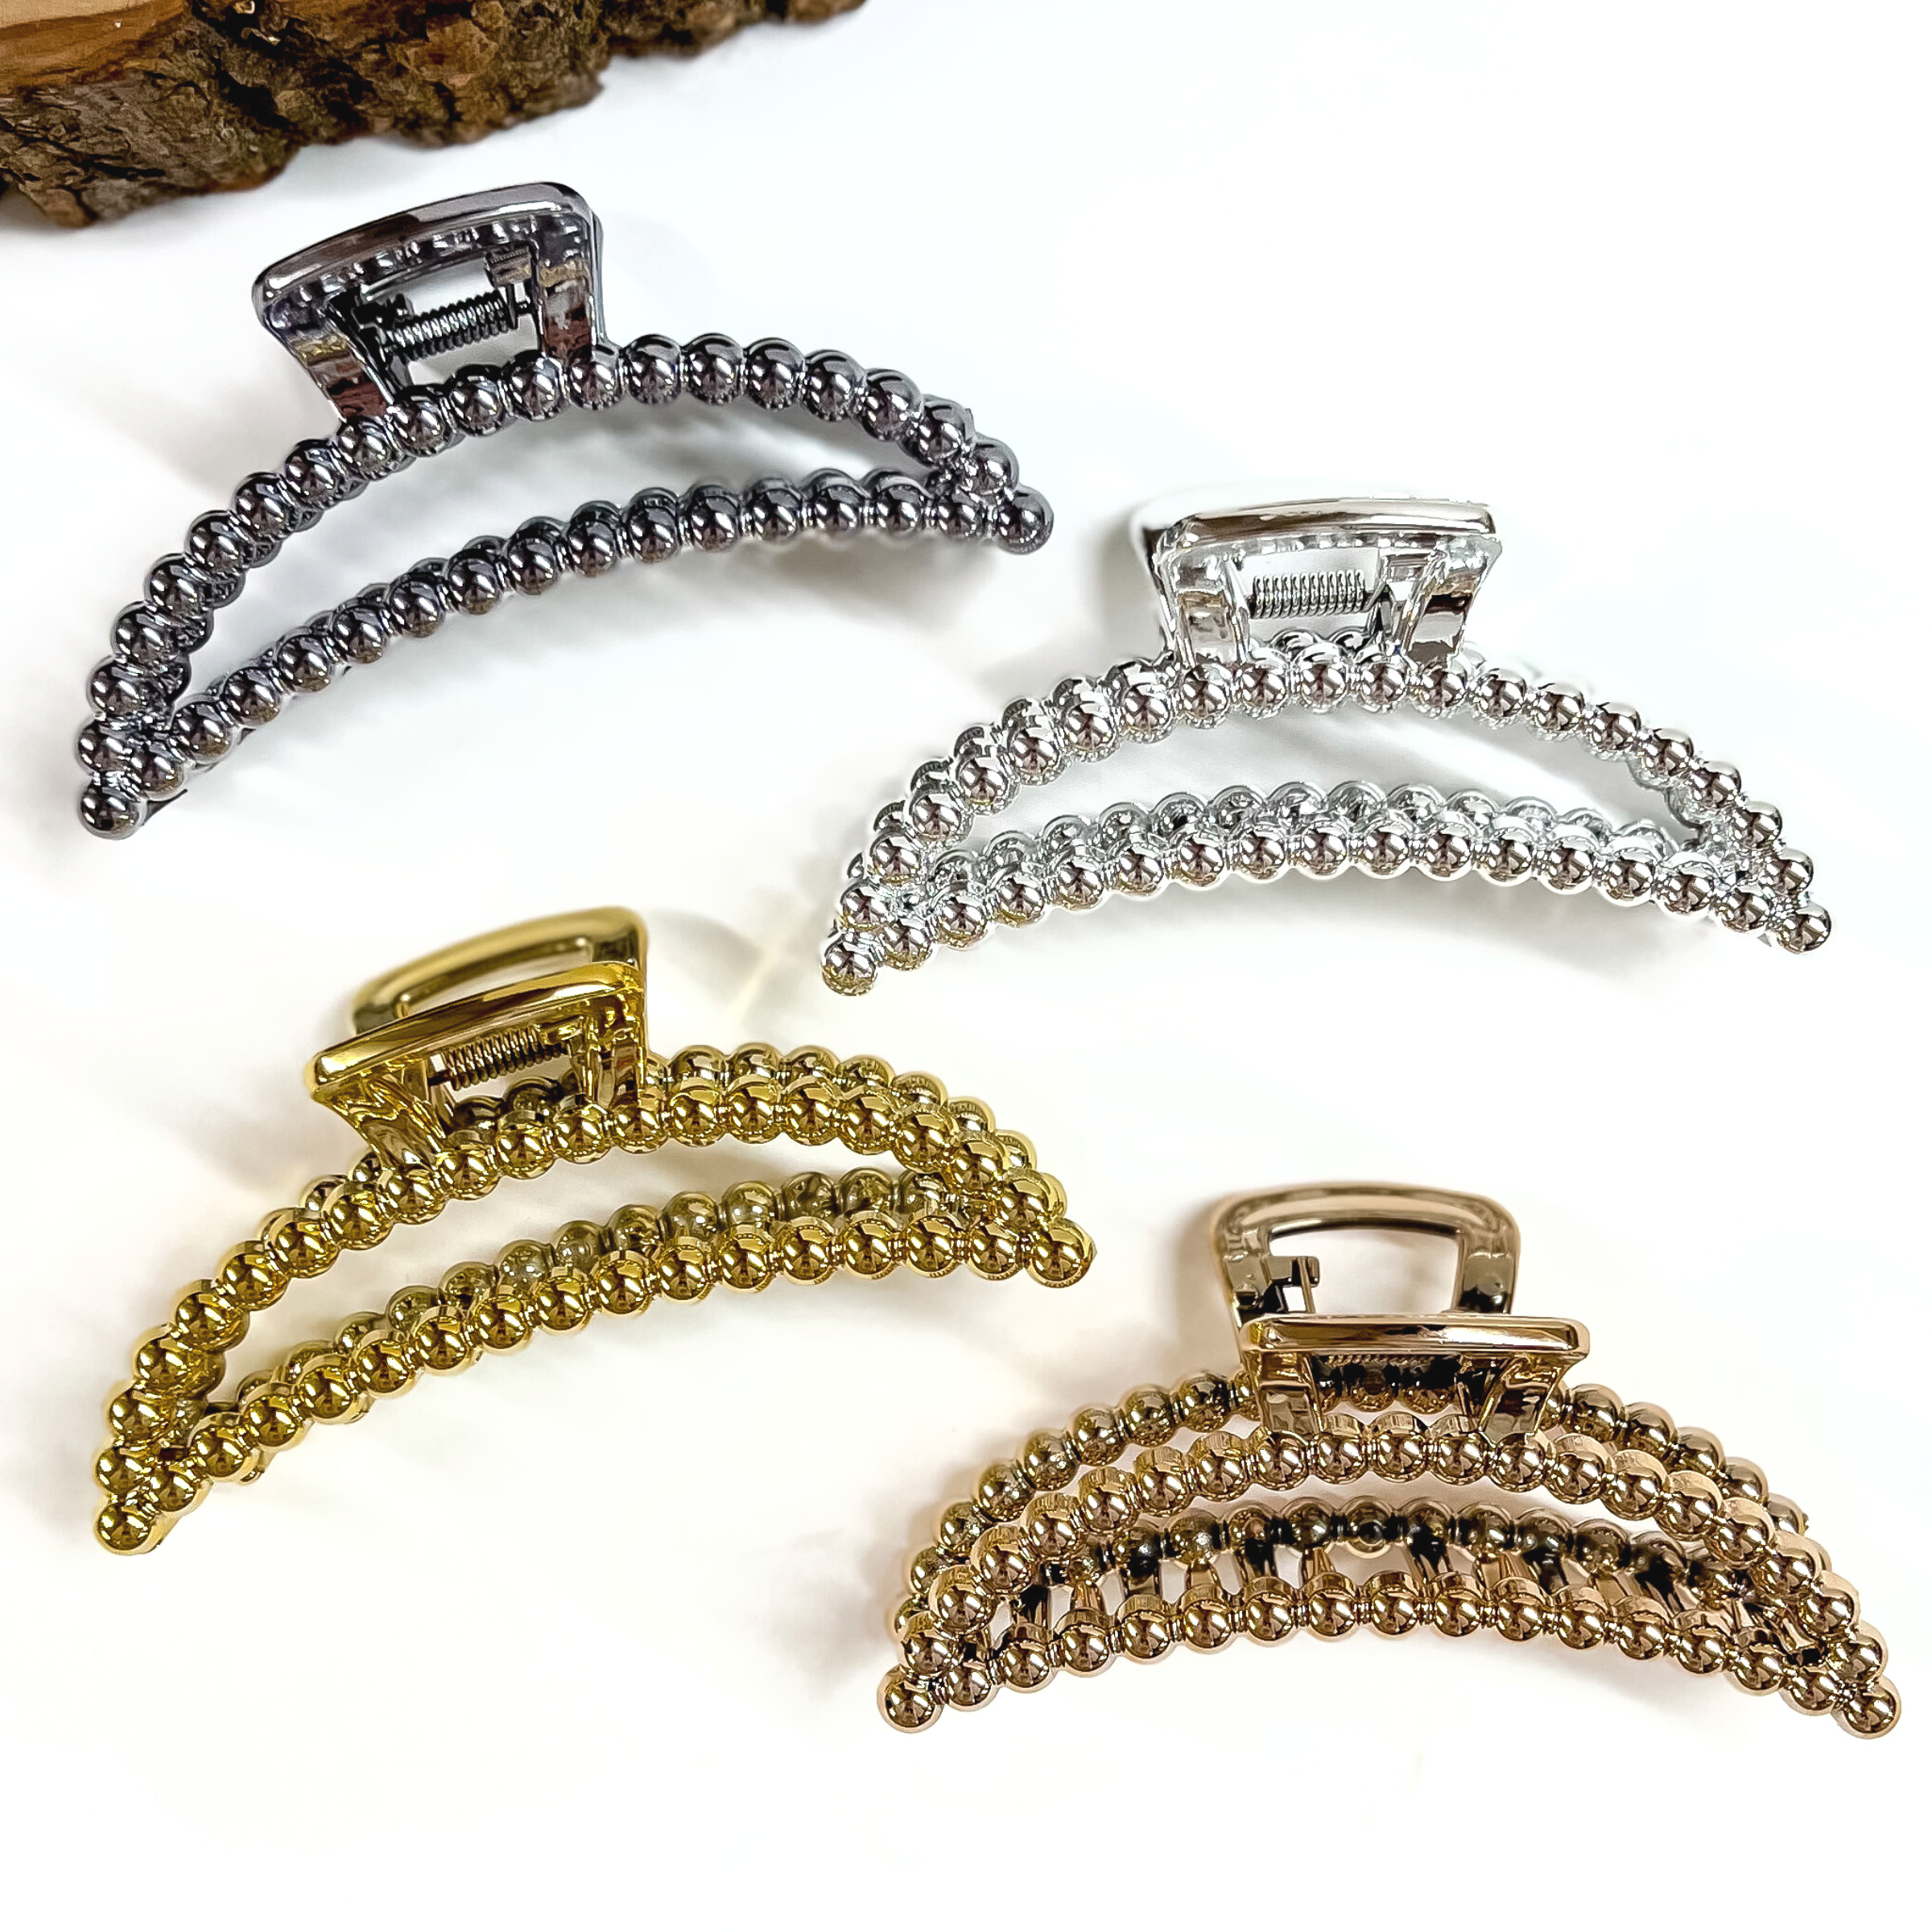 There are four metallic curved clips on different colors. They all have beaded texture all around, there is gunmetal, silver, gold, and copper. These clips are laying on  a white background with a slab of wood in the top as decor.